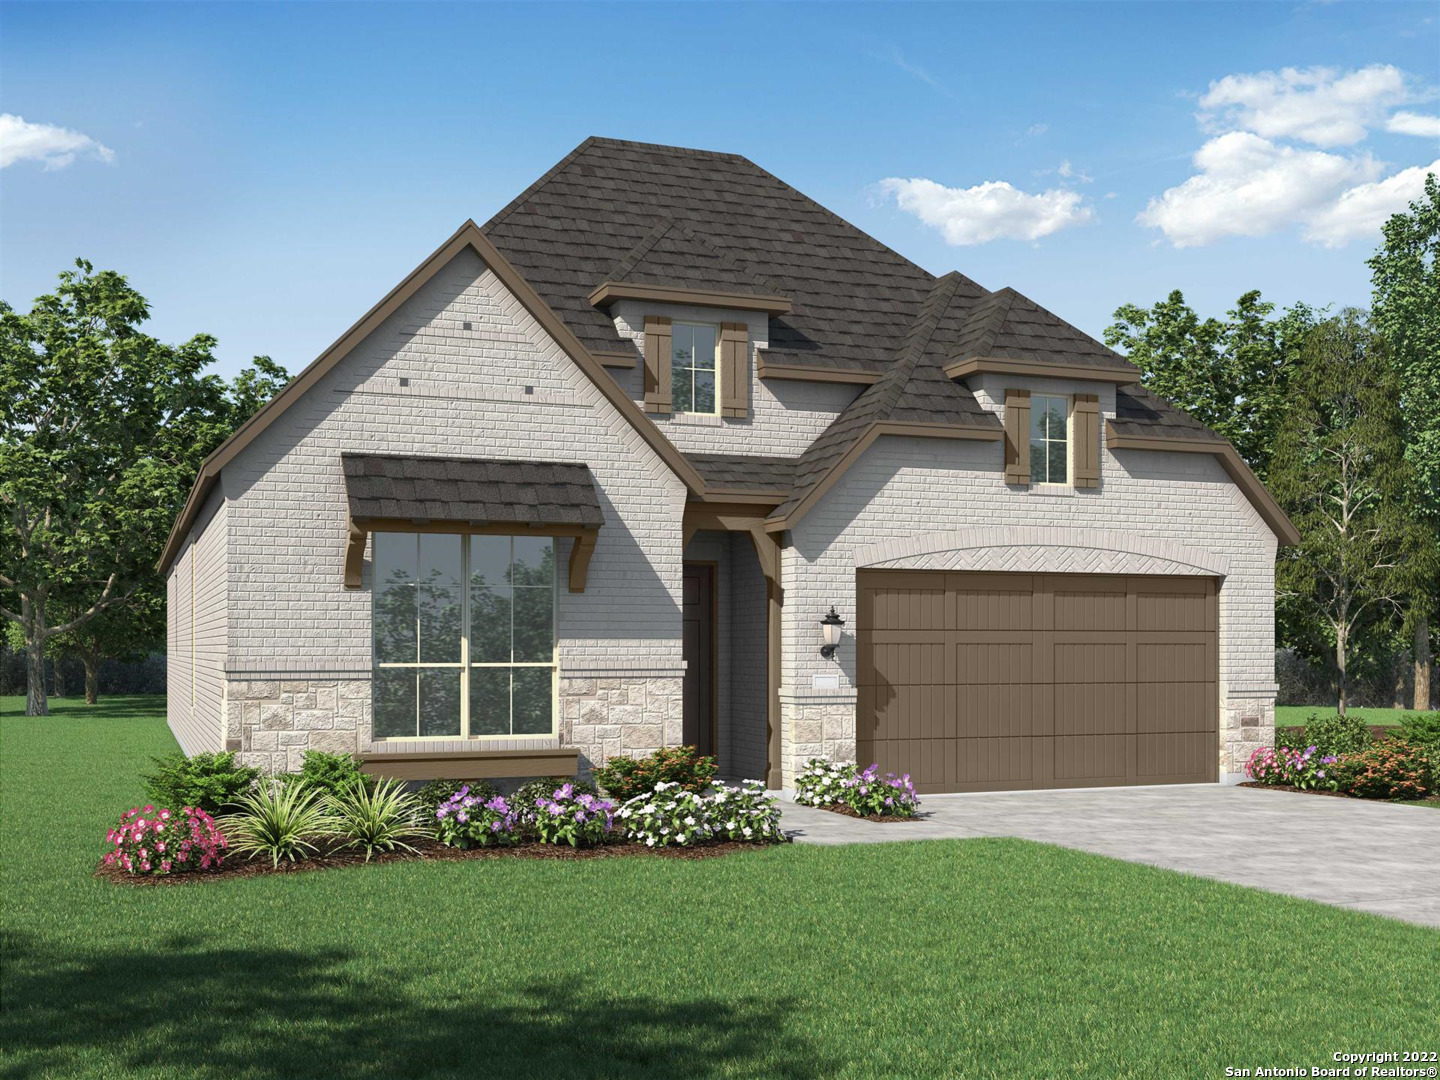 MLS# 1623678 - Built by Highland Homes - April completion! ~ Denton Plan. Single story home located near green-belt and walking trails. Entertainment room. Freestanding tub at Master bath. Extended outdoor back patio!